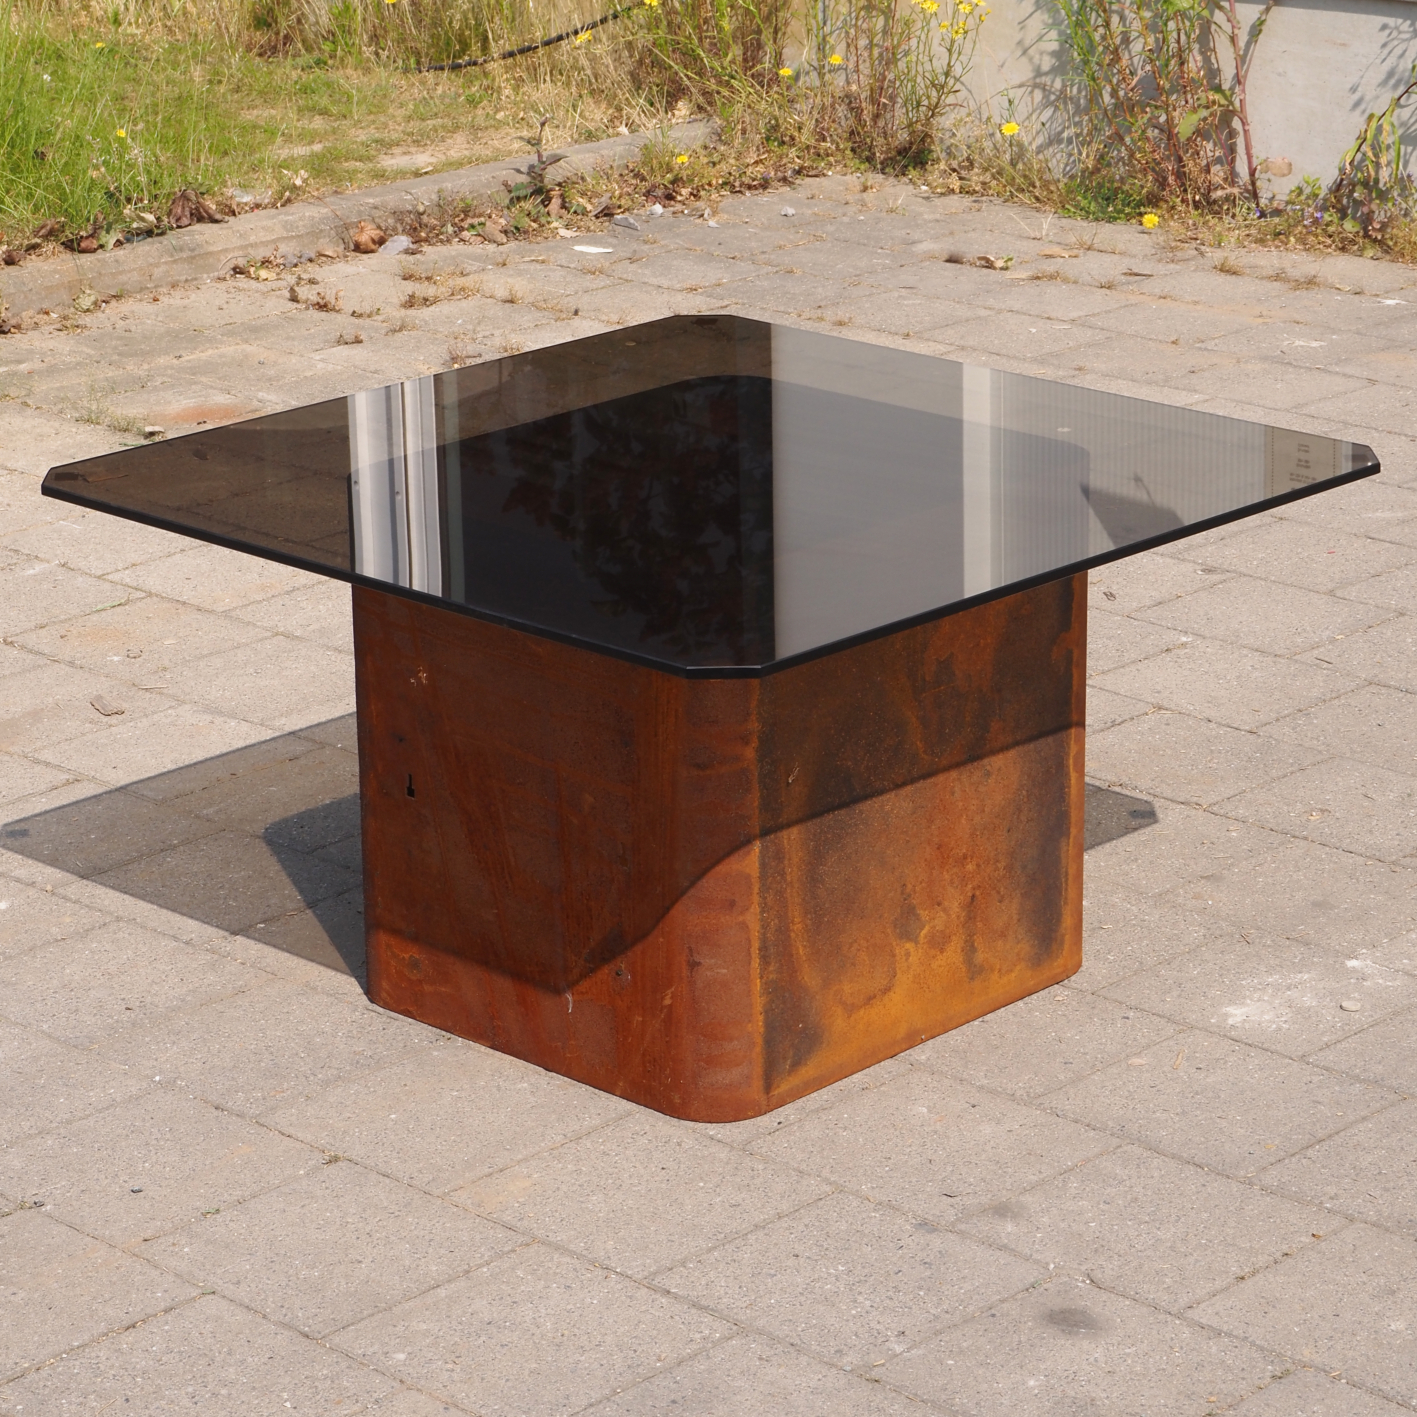 Coffee table top by GHYCZY (112 x 112 cm) - Smoked